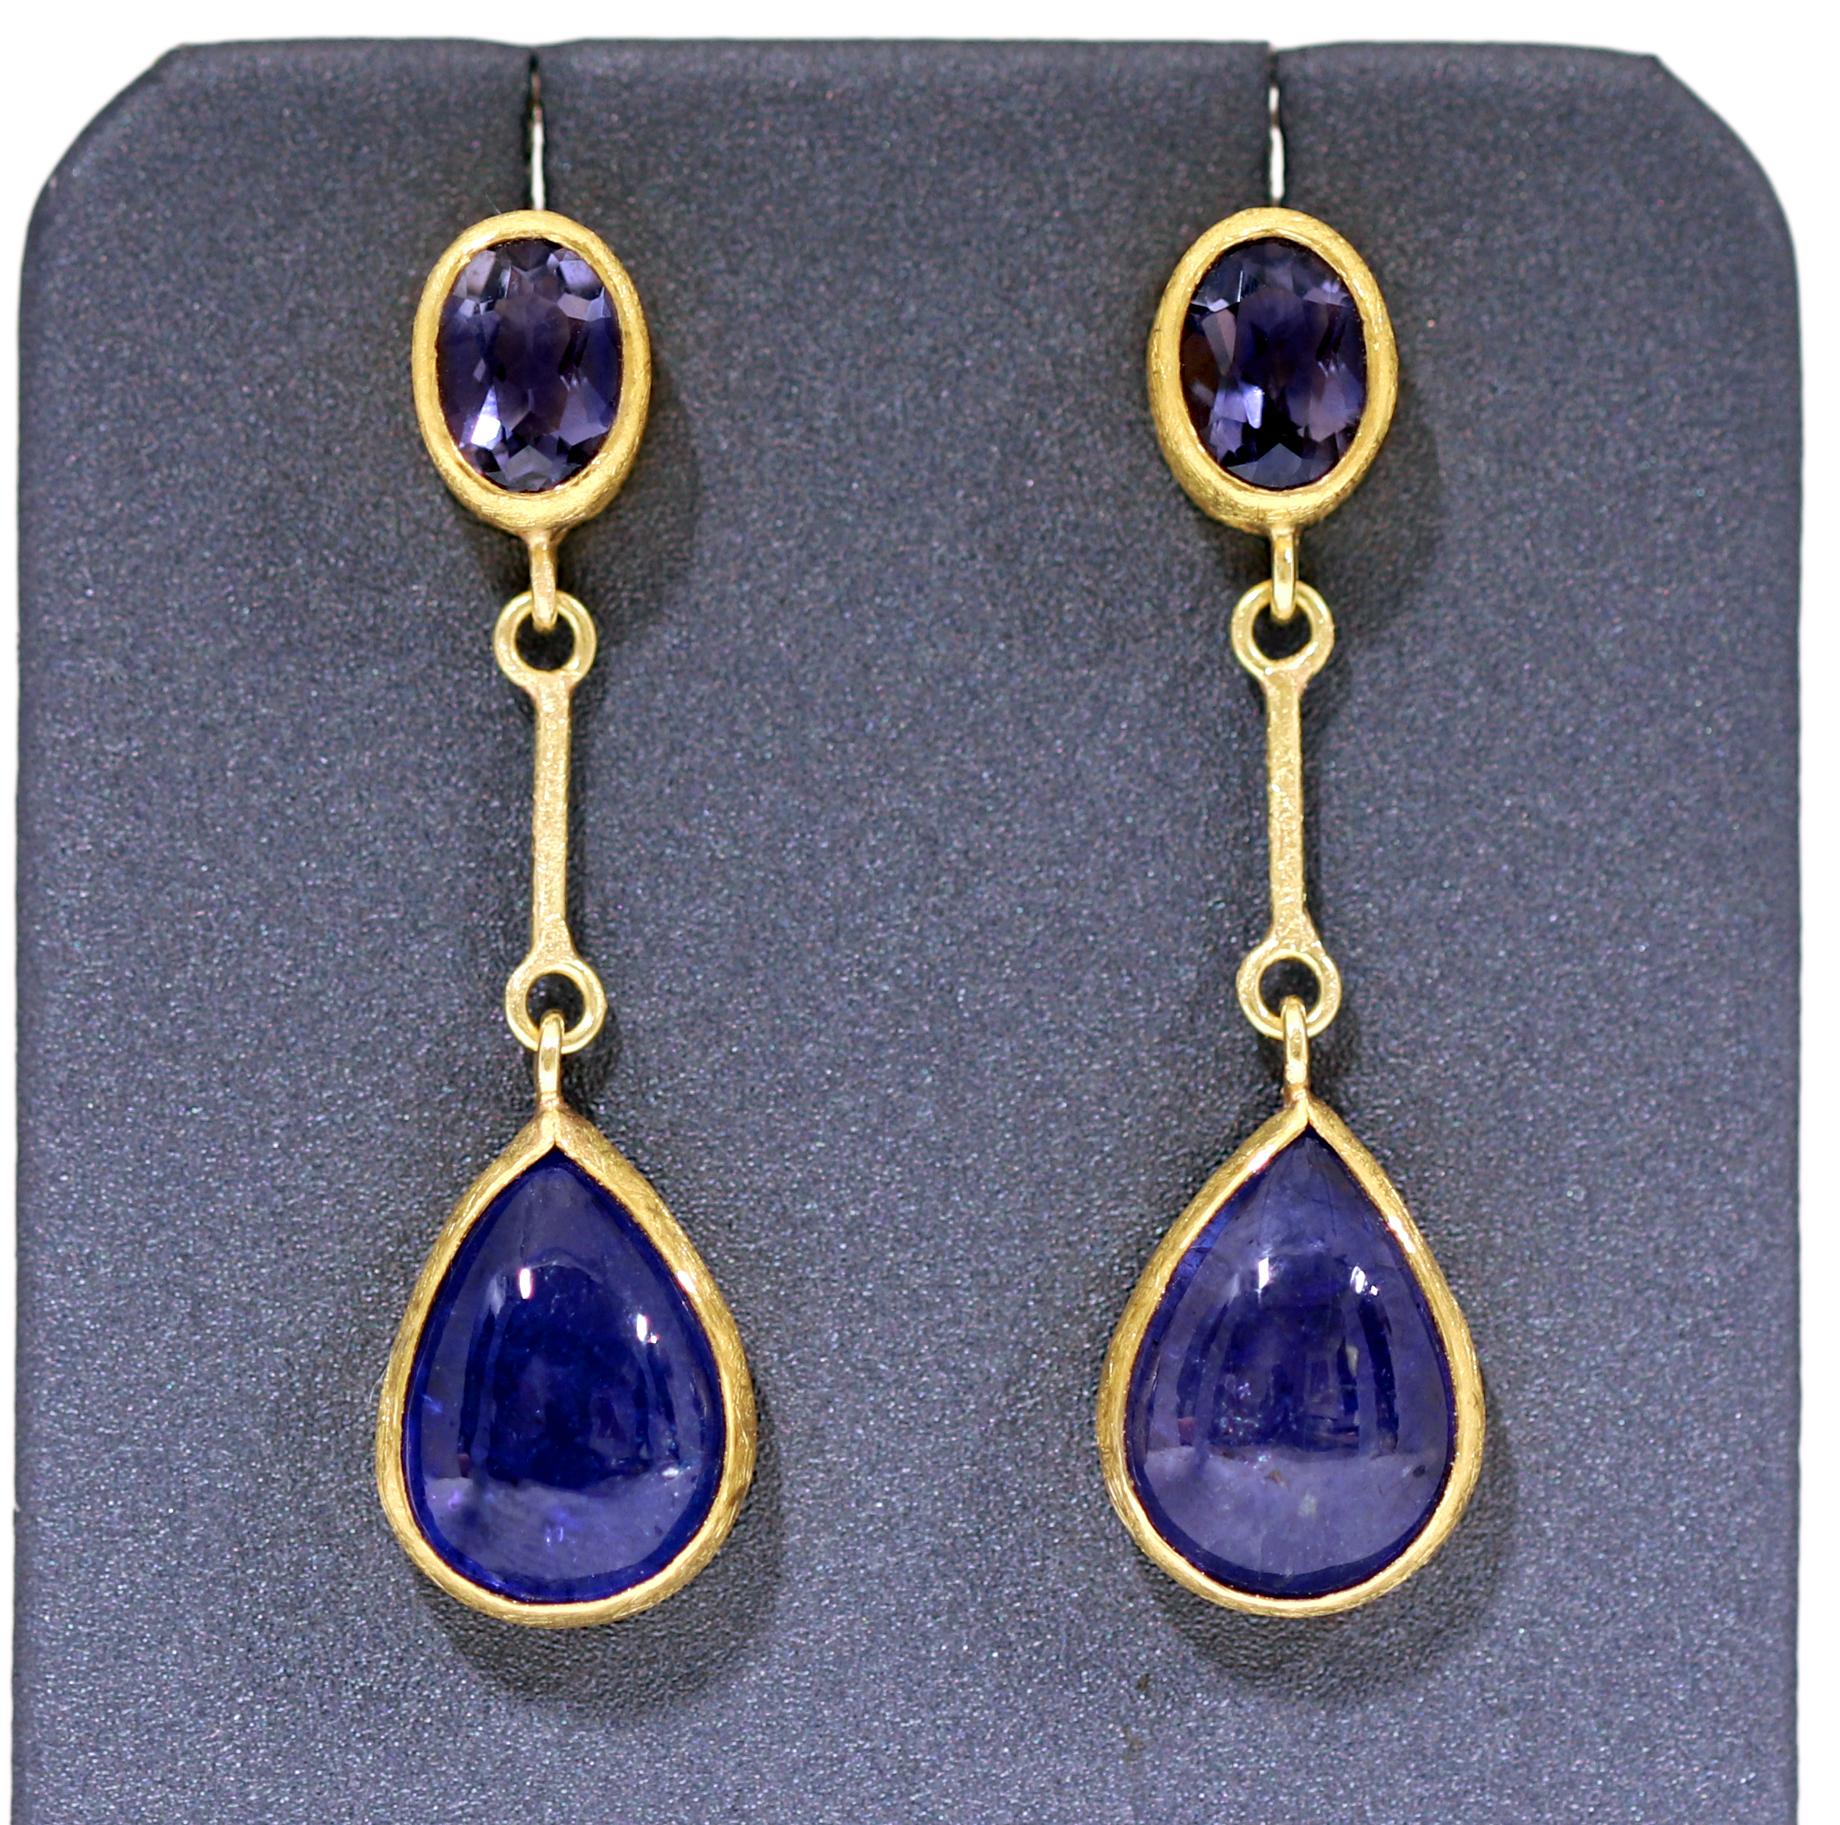 One of a Kind Segment Drop Earrings hand-fabricated by jewelry maker Petra Class featuring both a matched pair of shimmering faceted tanzanite ovals and a matched pair of gorgeous cabochon cut tanzanite drops, all bezel-set in signature-finished 22k